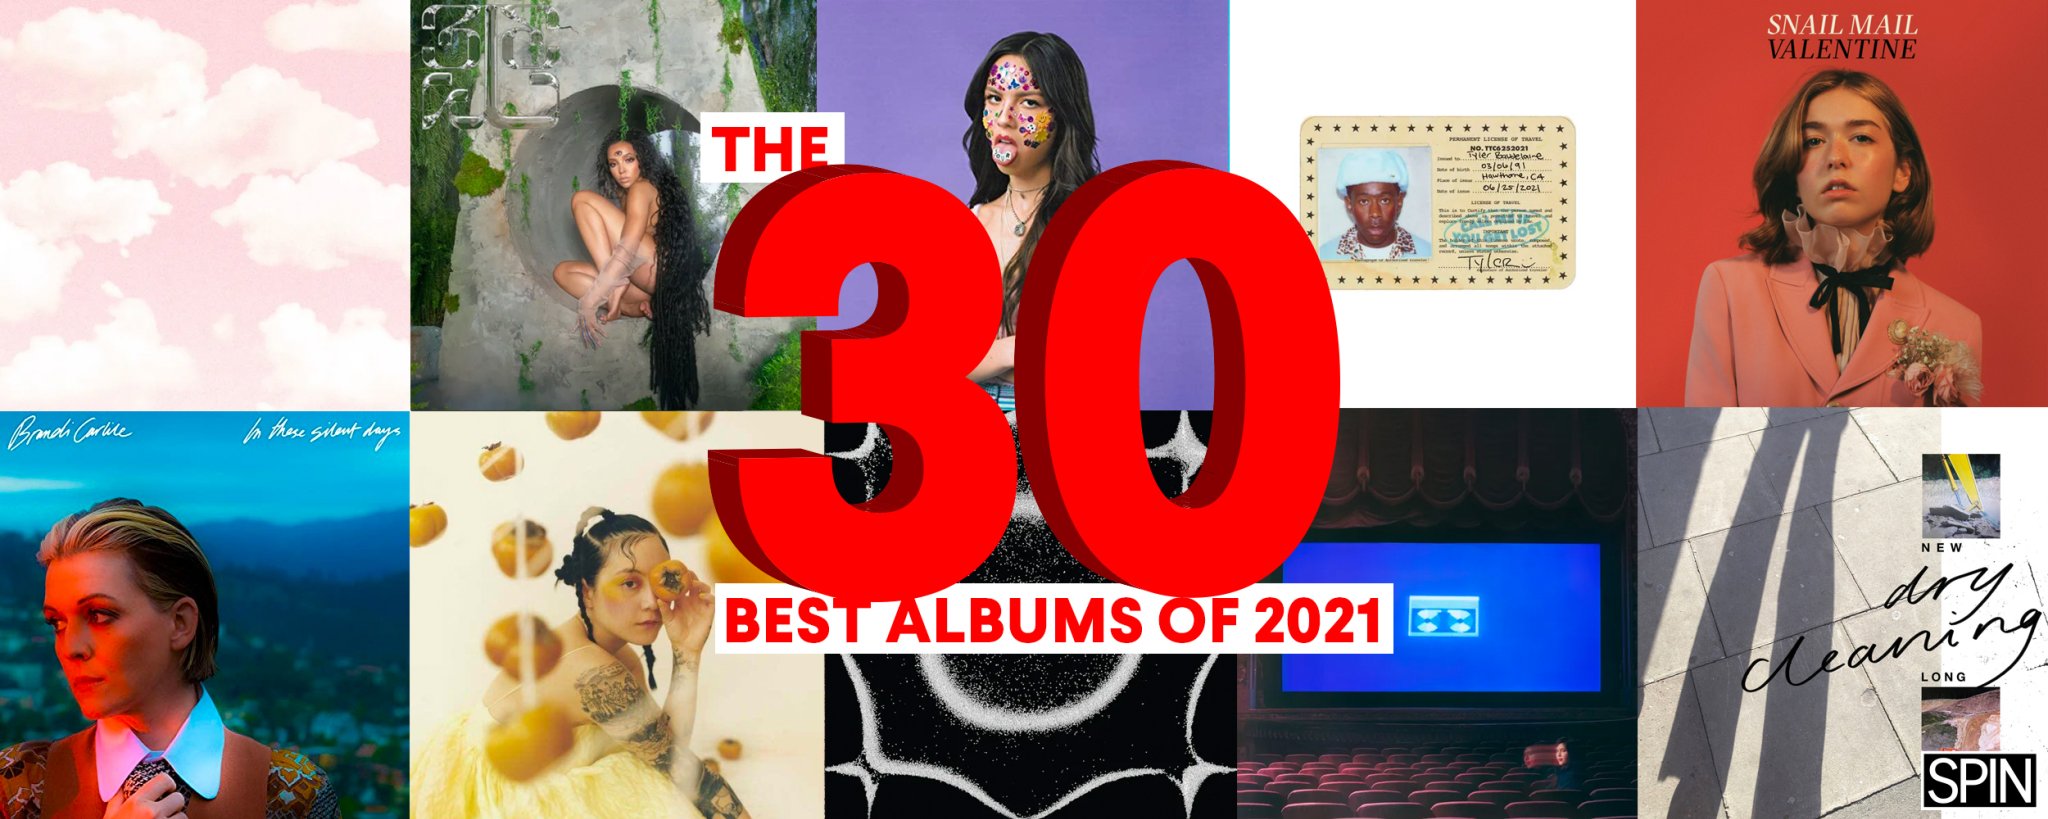 The 30 Best Albums of 2021